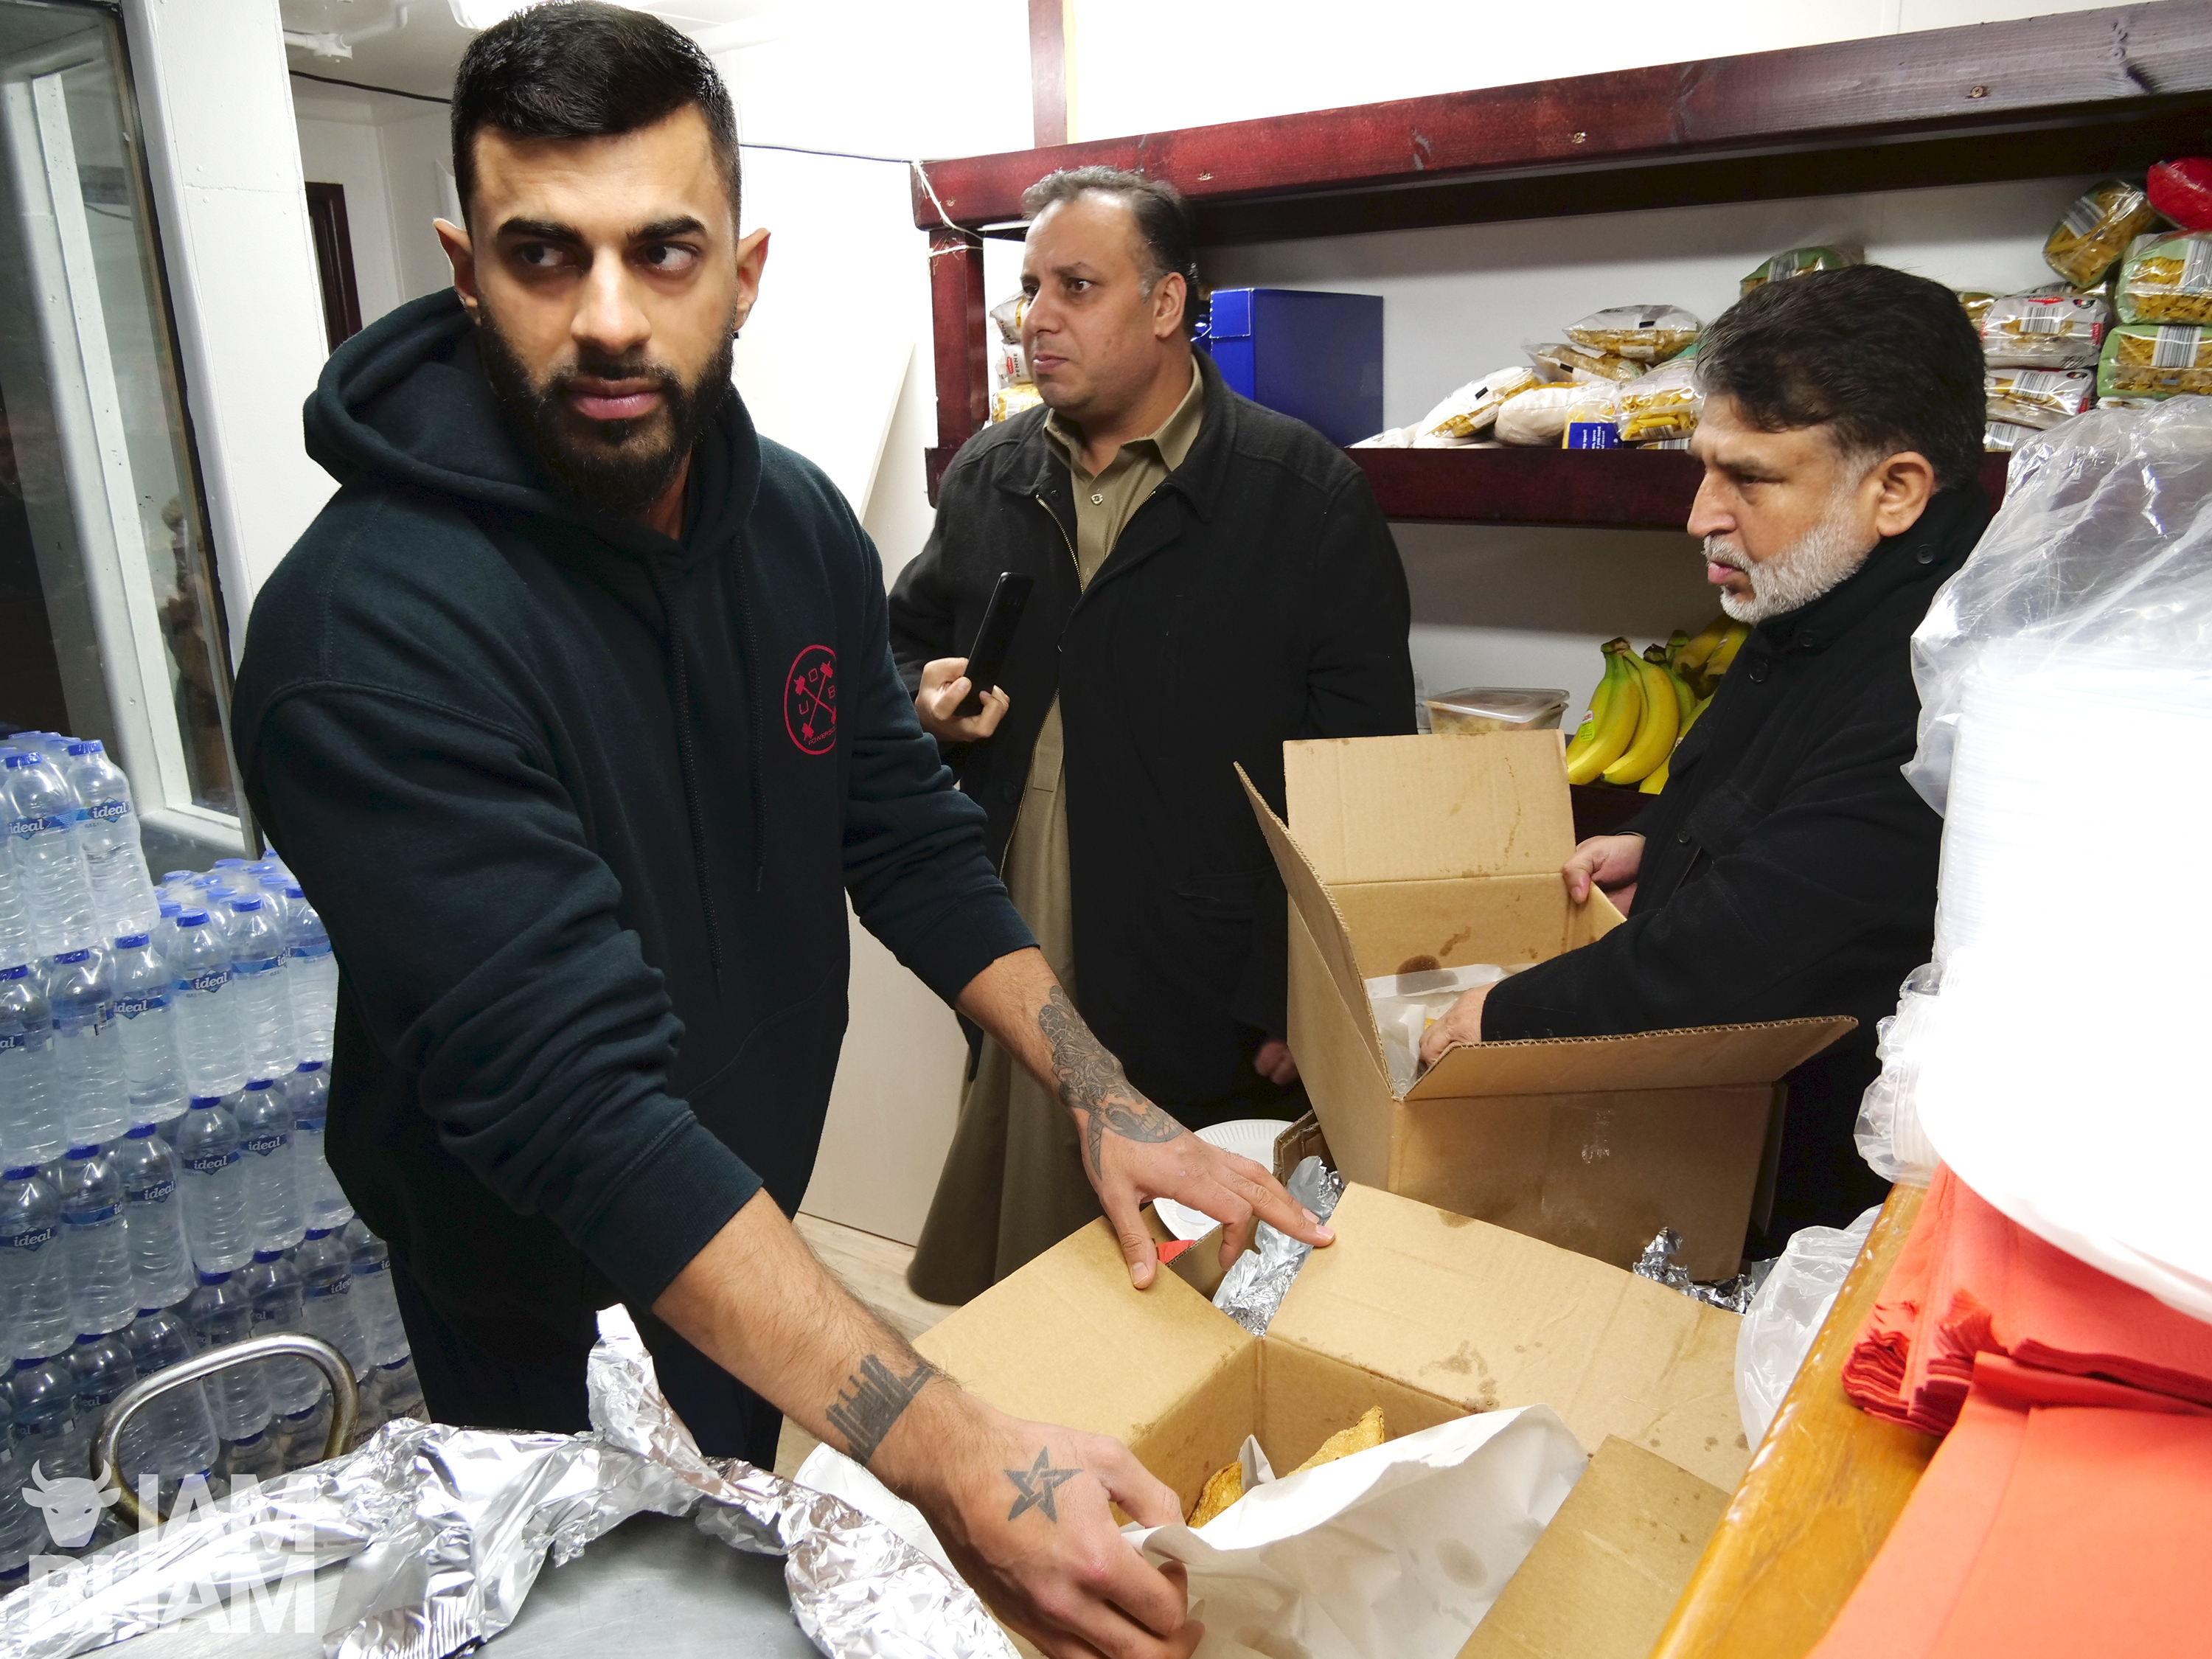 Volunteers have been turning out to help serve hot food to the homeless and needy at Birmingham Central Mosque